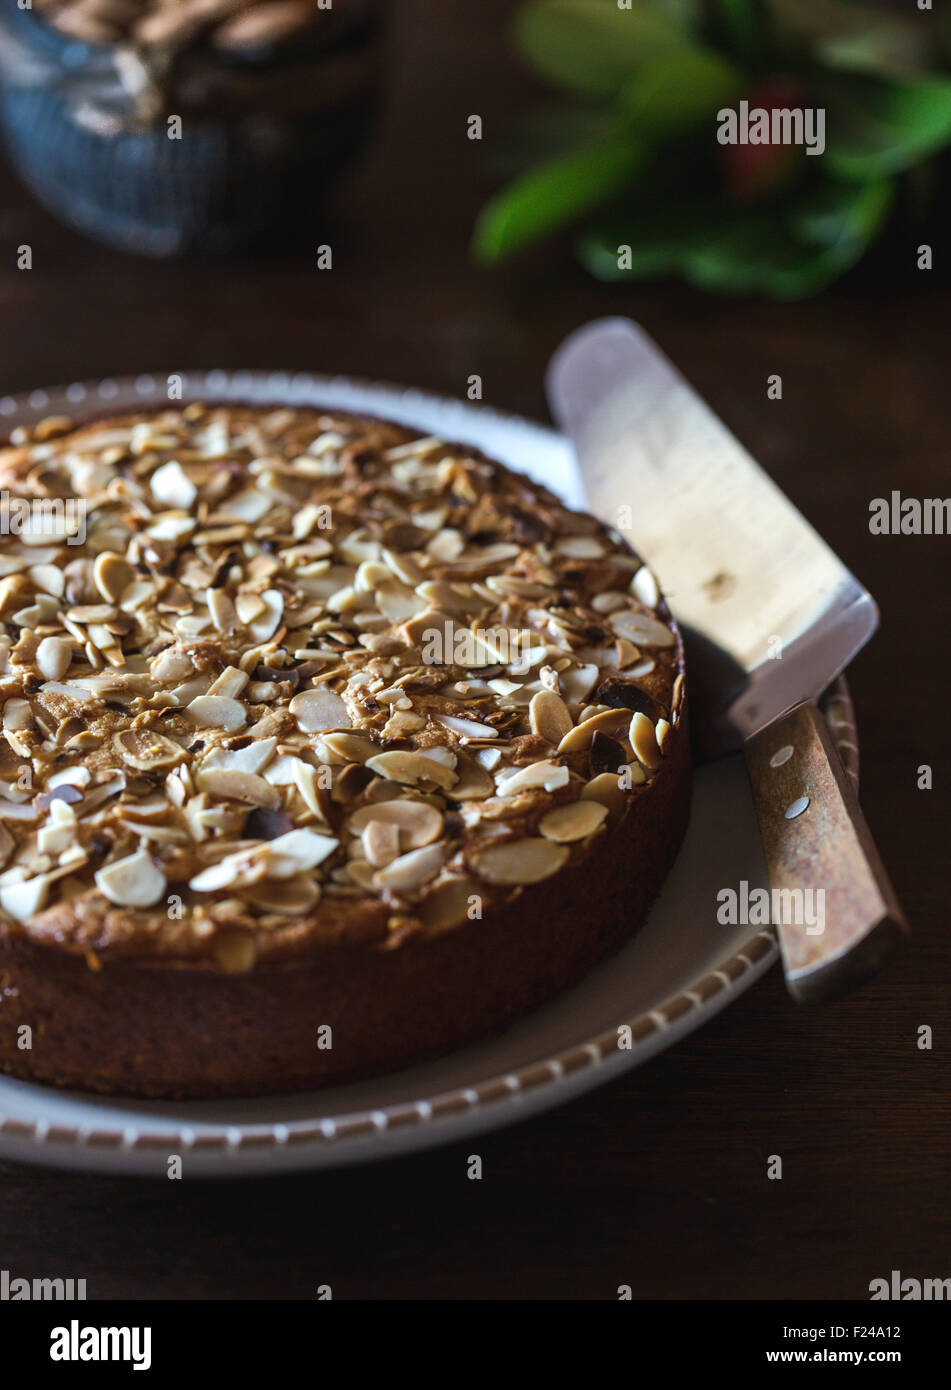 A Ricotta and Almond Polenta Cake displayed on a dark wood table. Stock Photo